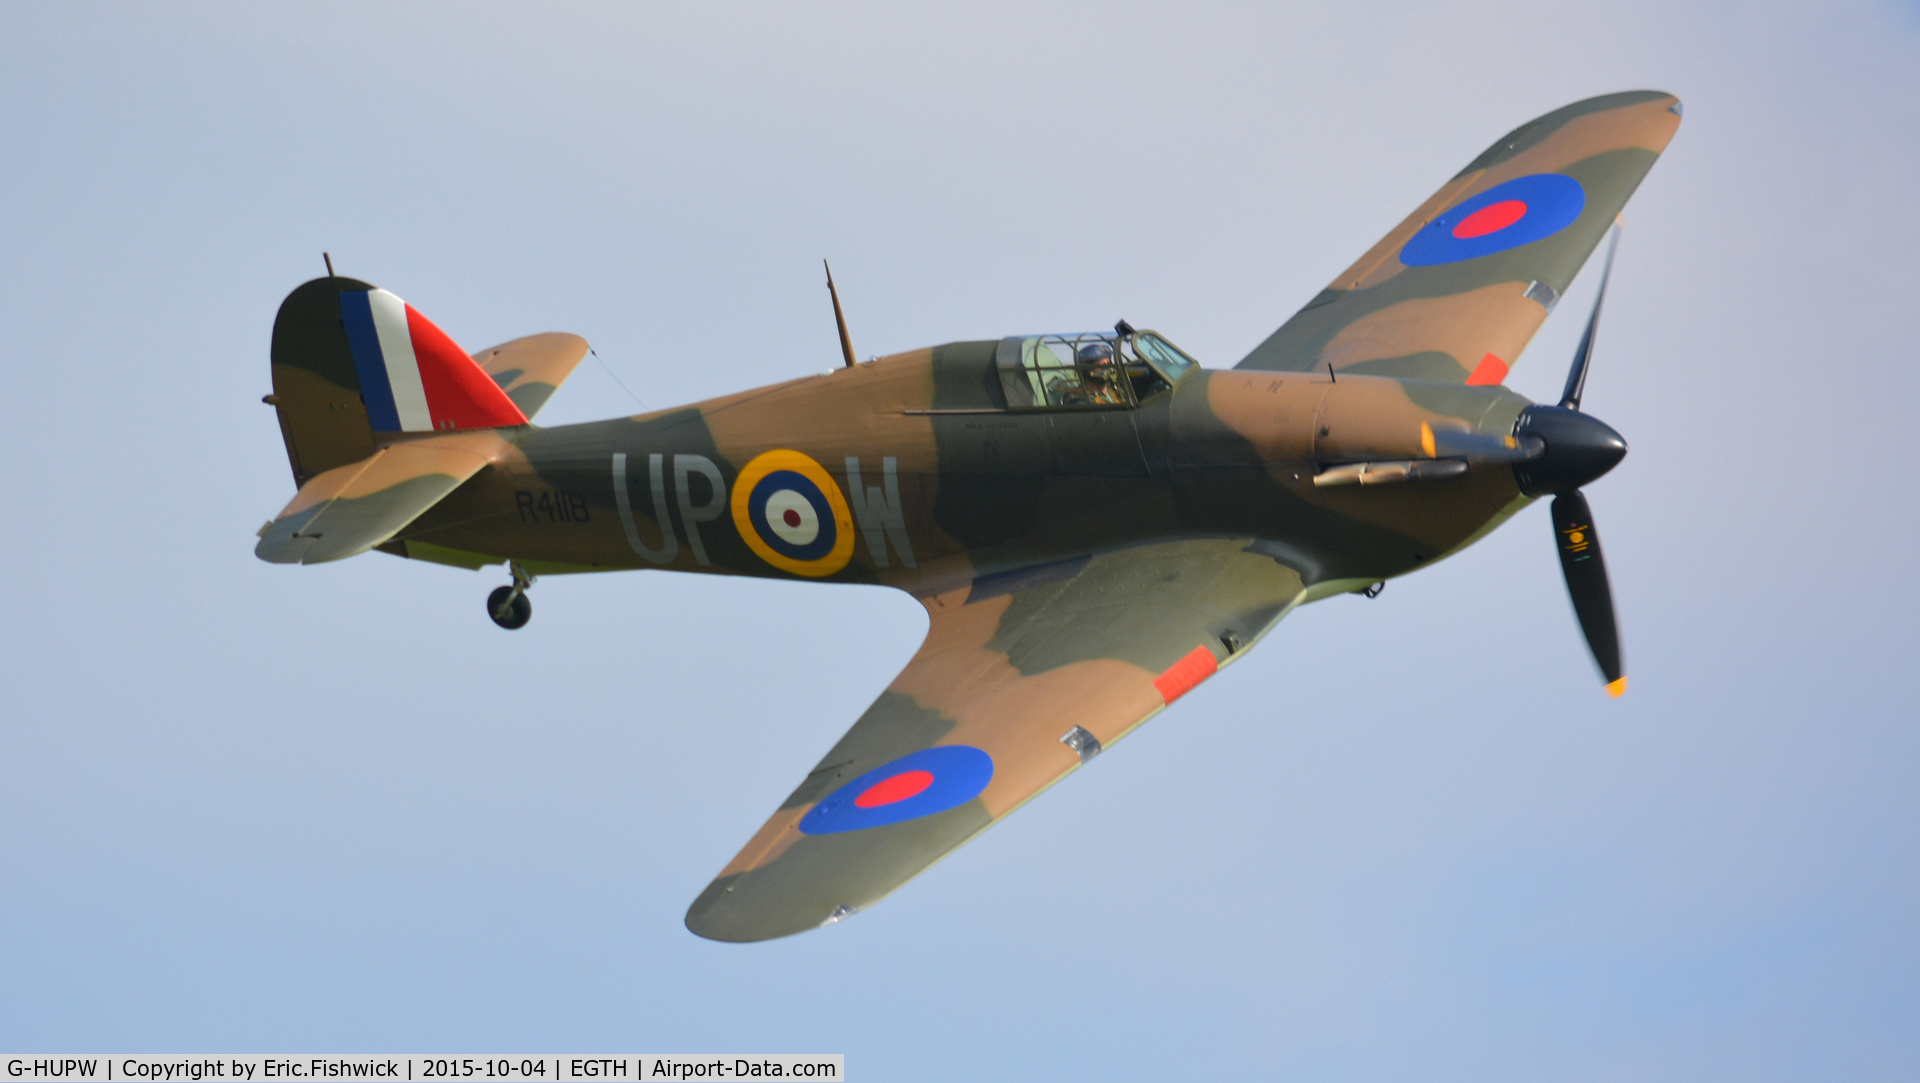 G-HUPW, 1940 Hawker Hurricane I C/N G592301, 43. R4118 at The Shuttleworth 'Uncovered' Airshow (Finale,) Oct. 2015.